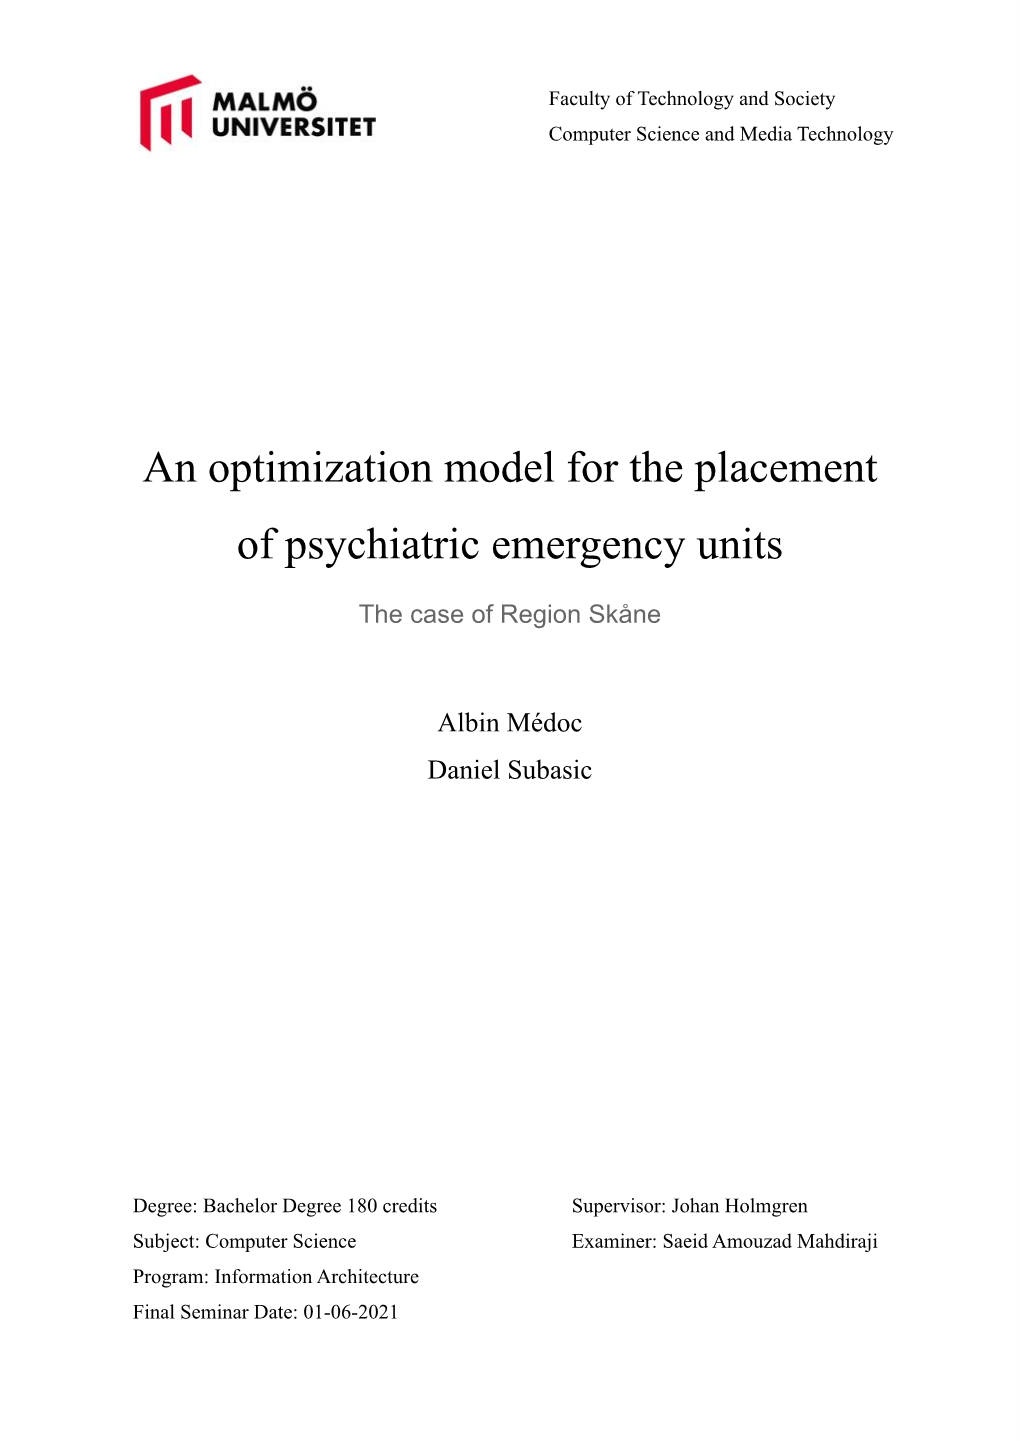 An Optimization Model for the Placement of Psychiatric Emergency Units